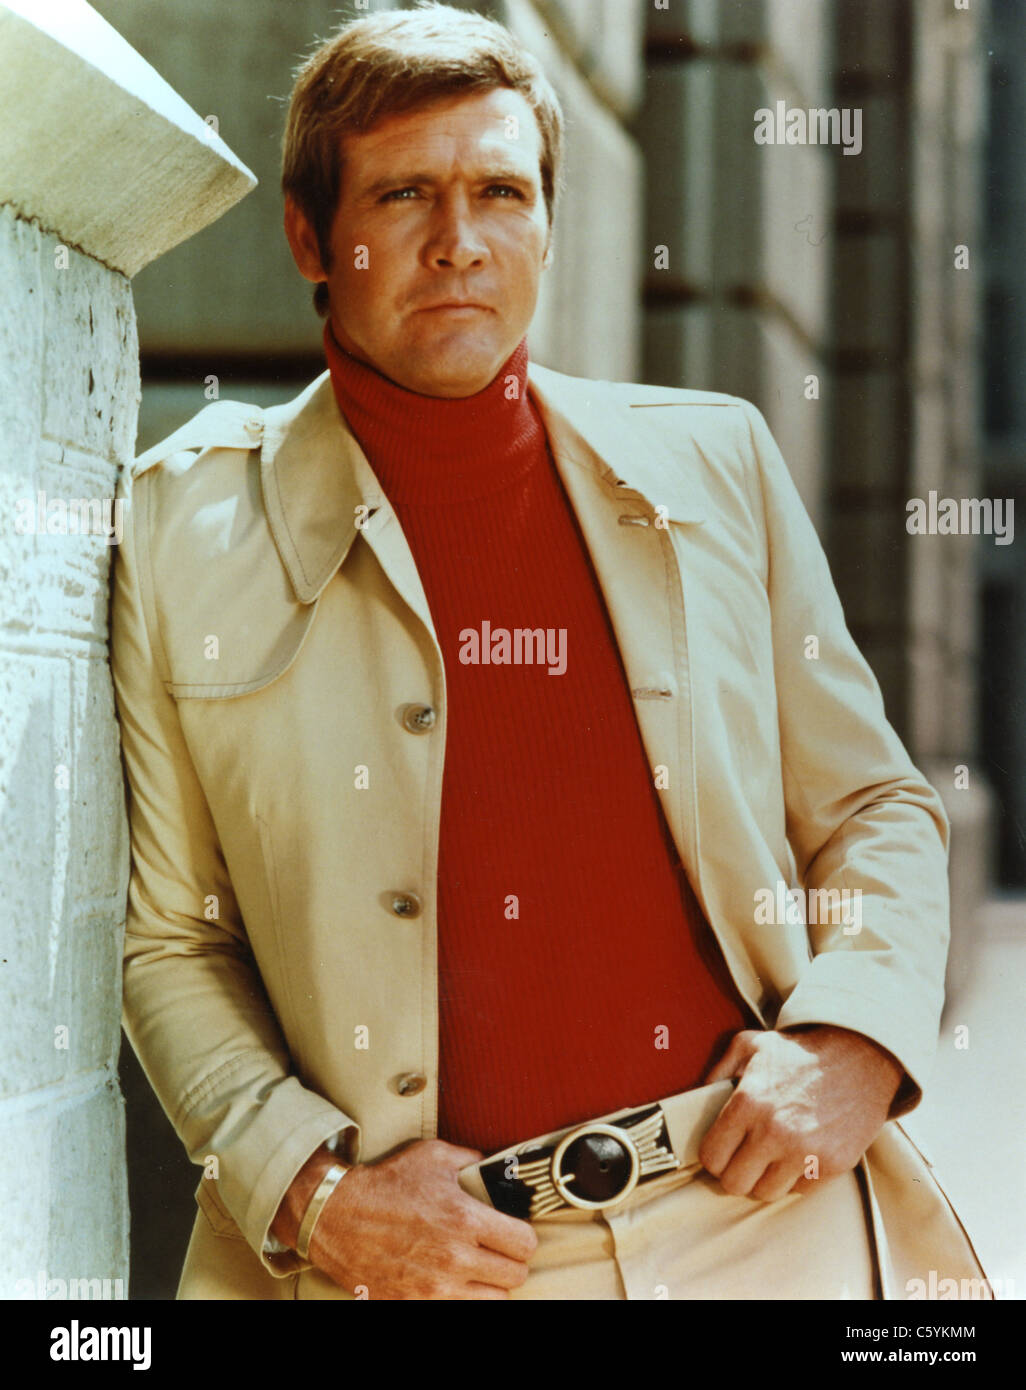 LEE MAJORS US film and TV actor about 1975 Stock Photo